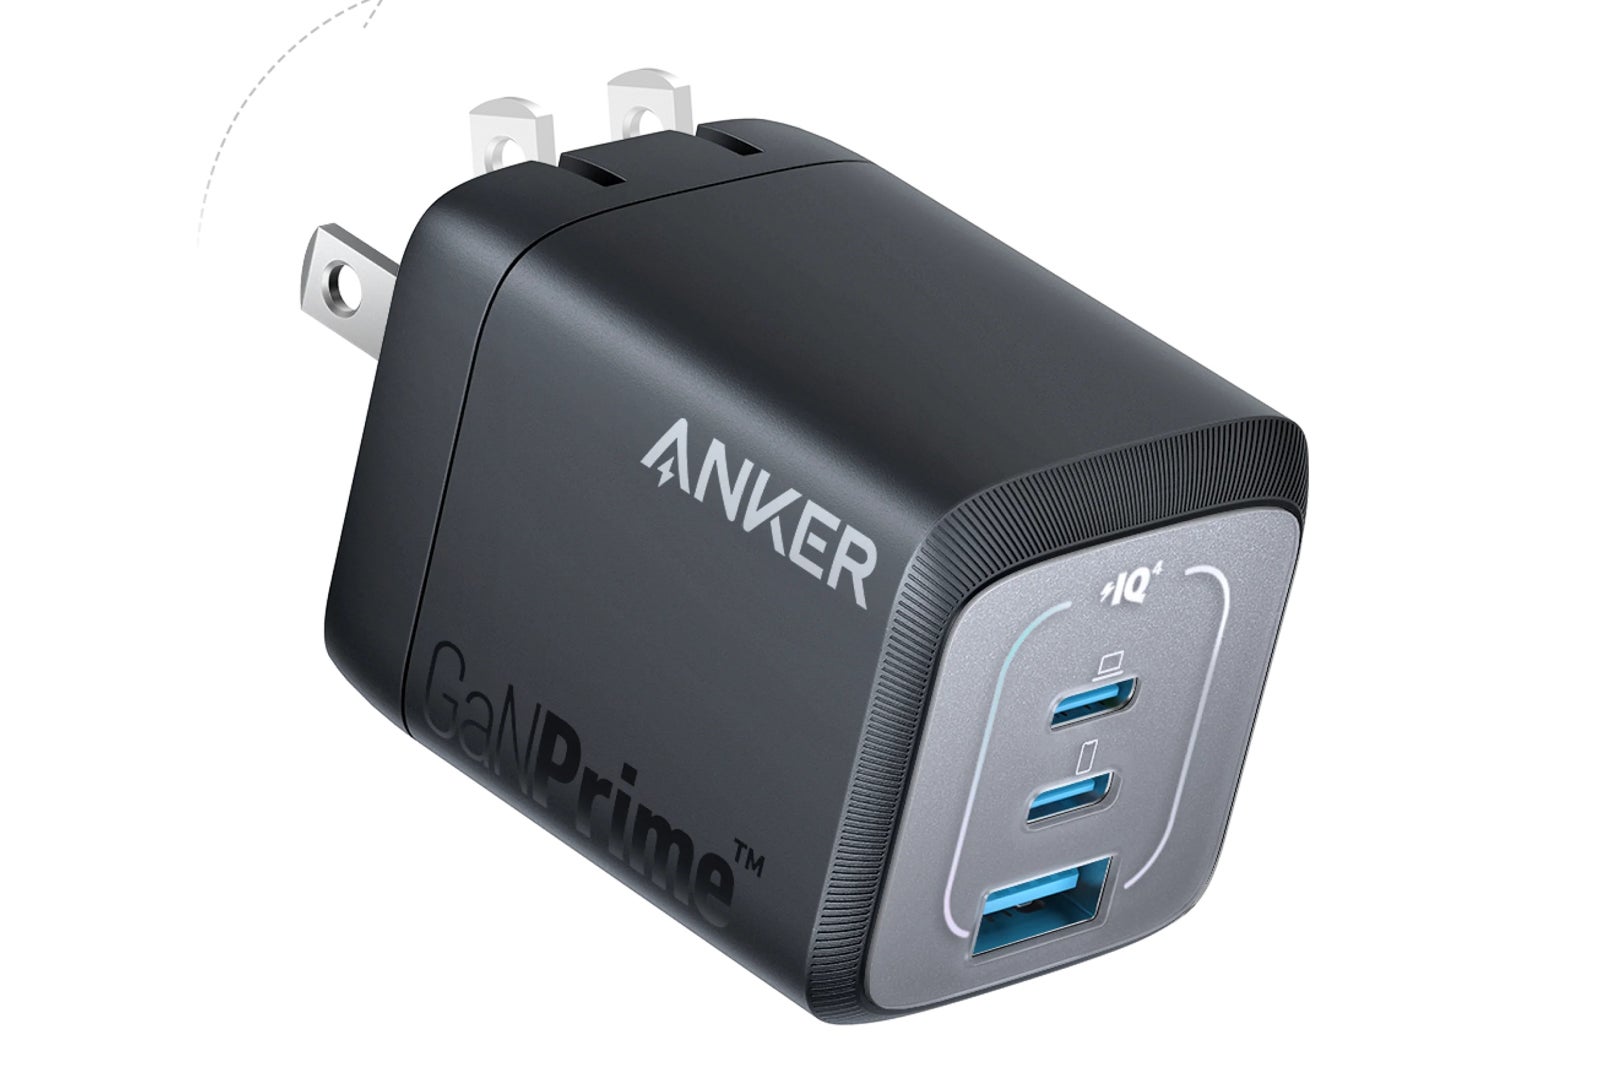 Anker USB charger for travel